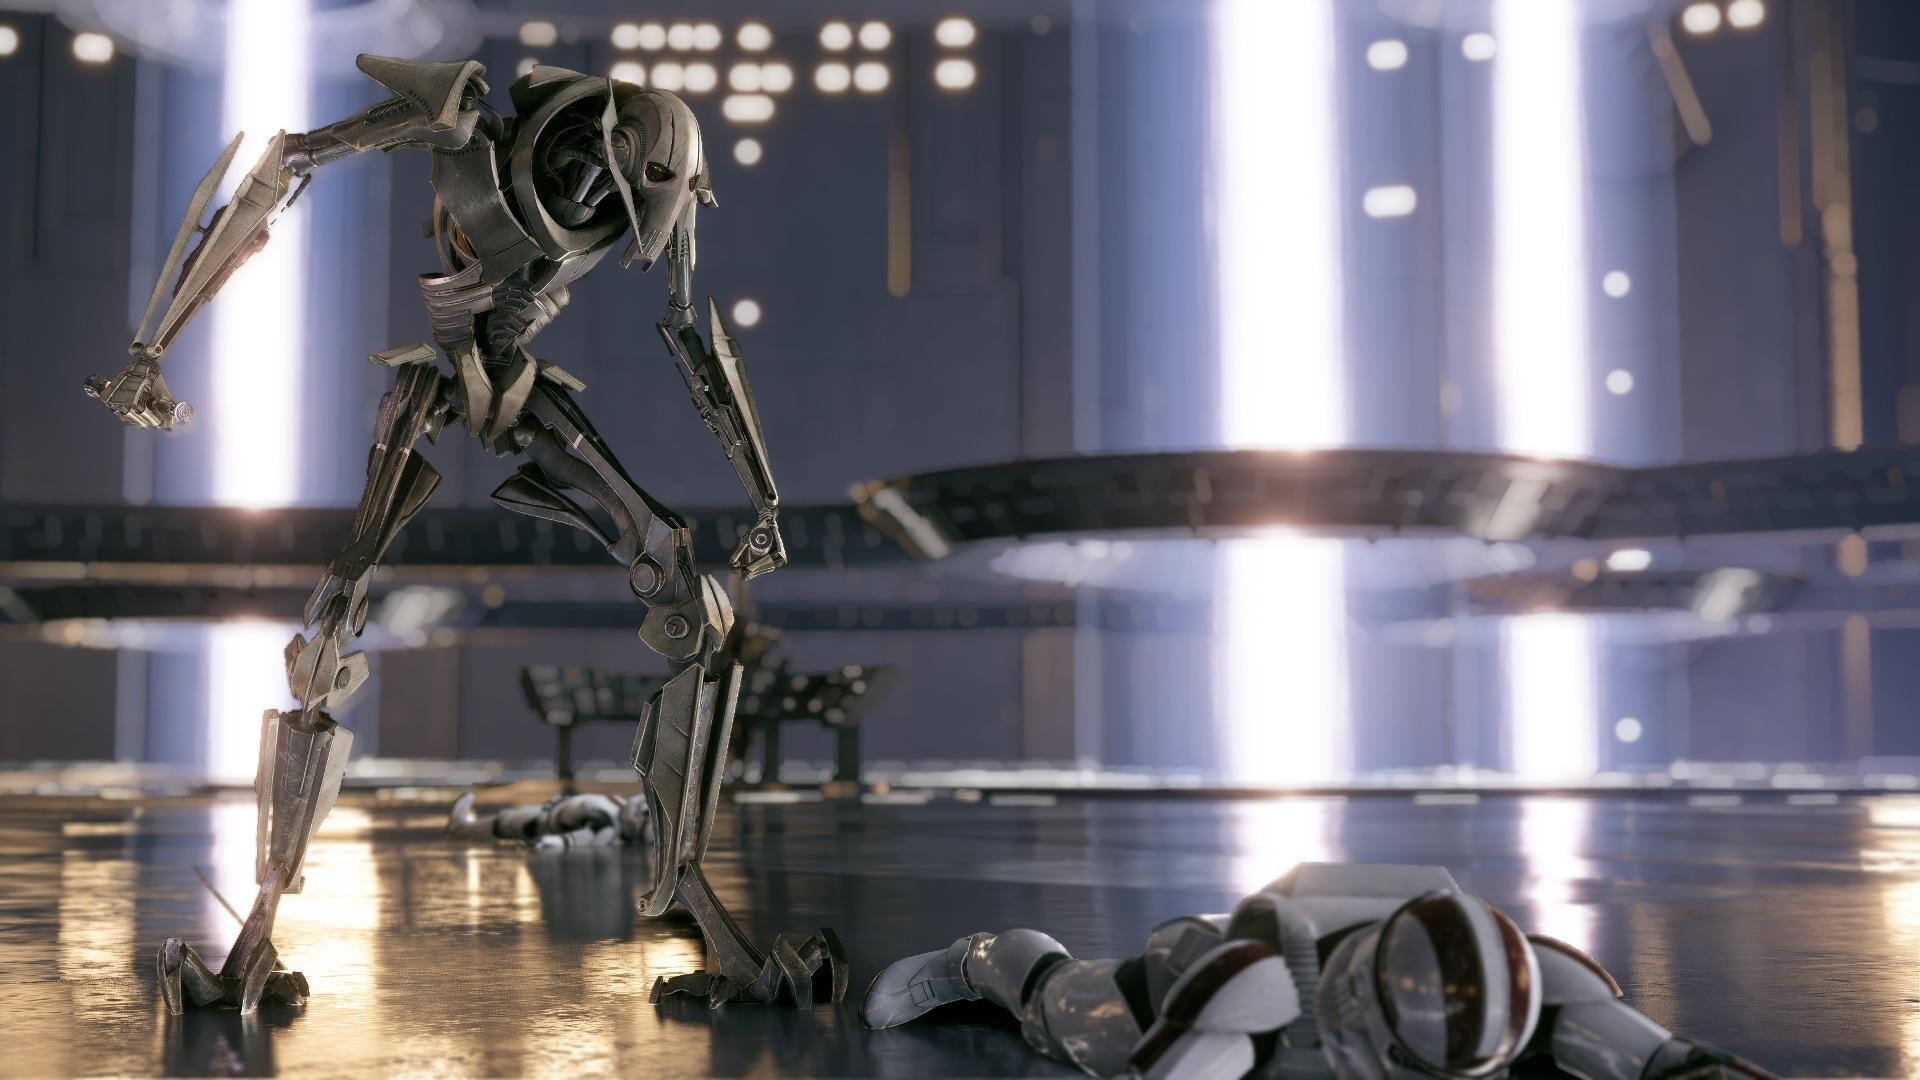 General Grievous: Originally conceived as a droid general by George Lucas, A warrior from the planet Kalee. 1920x1080 Full HD Wallpaper.